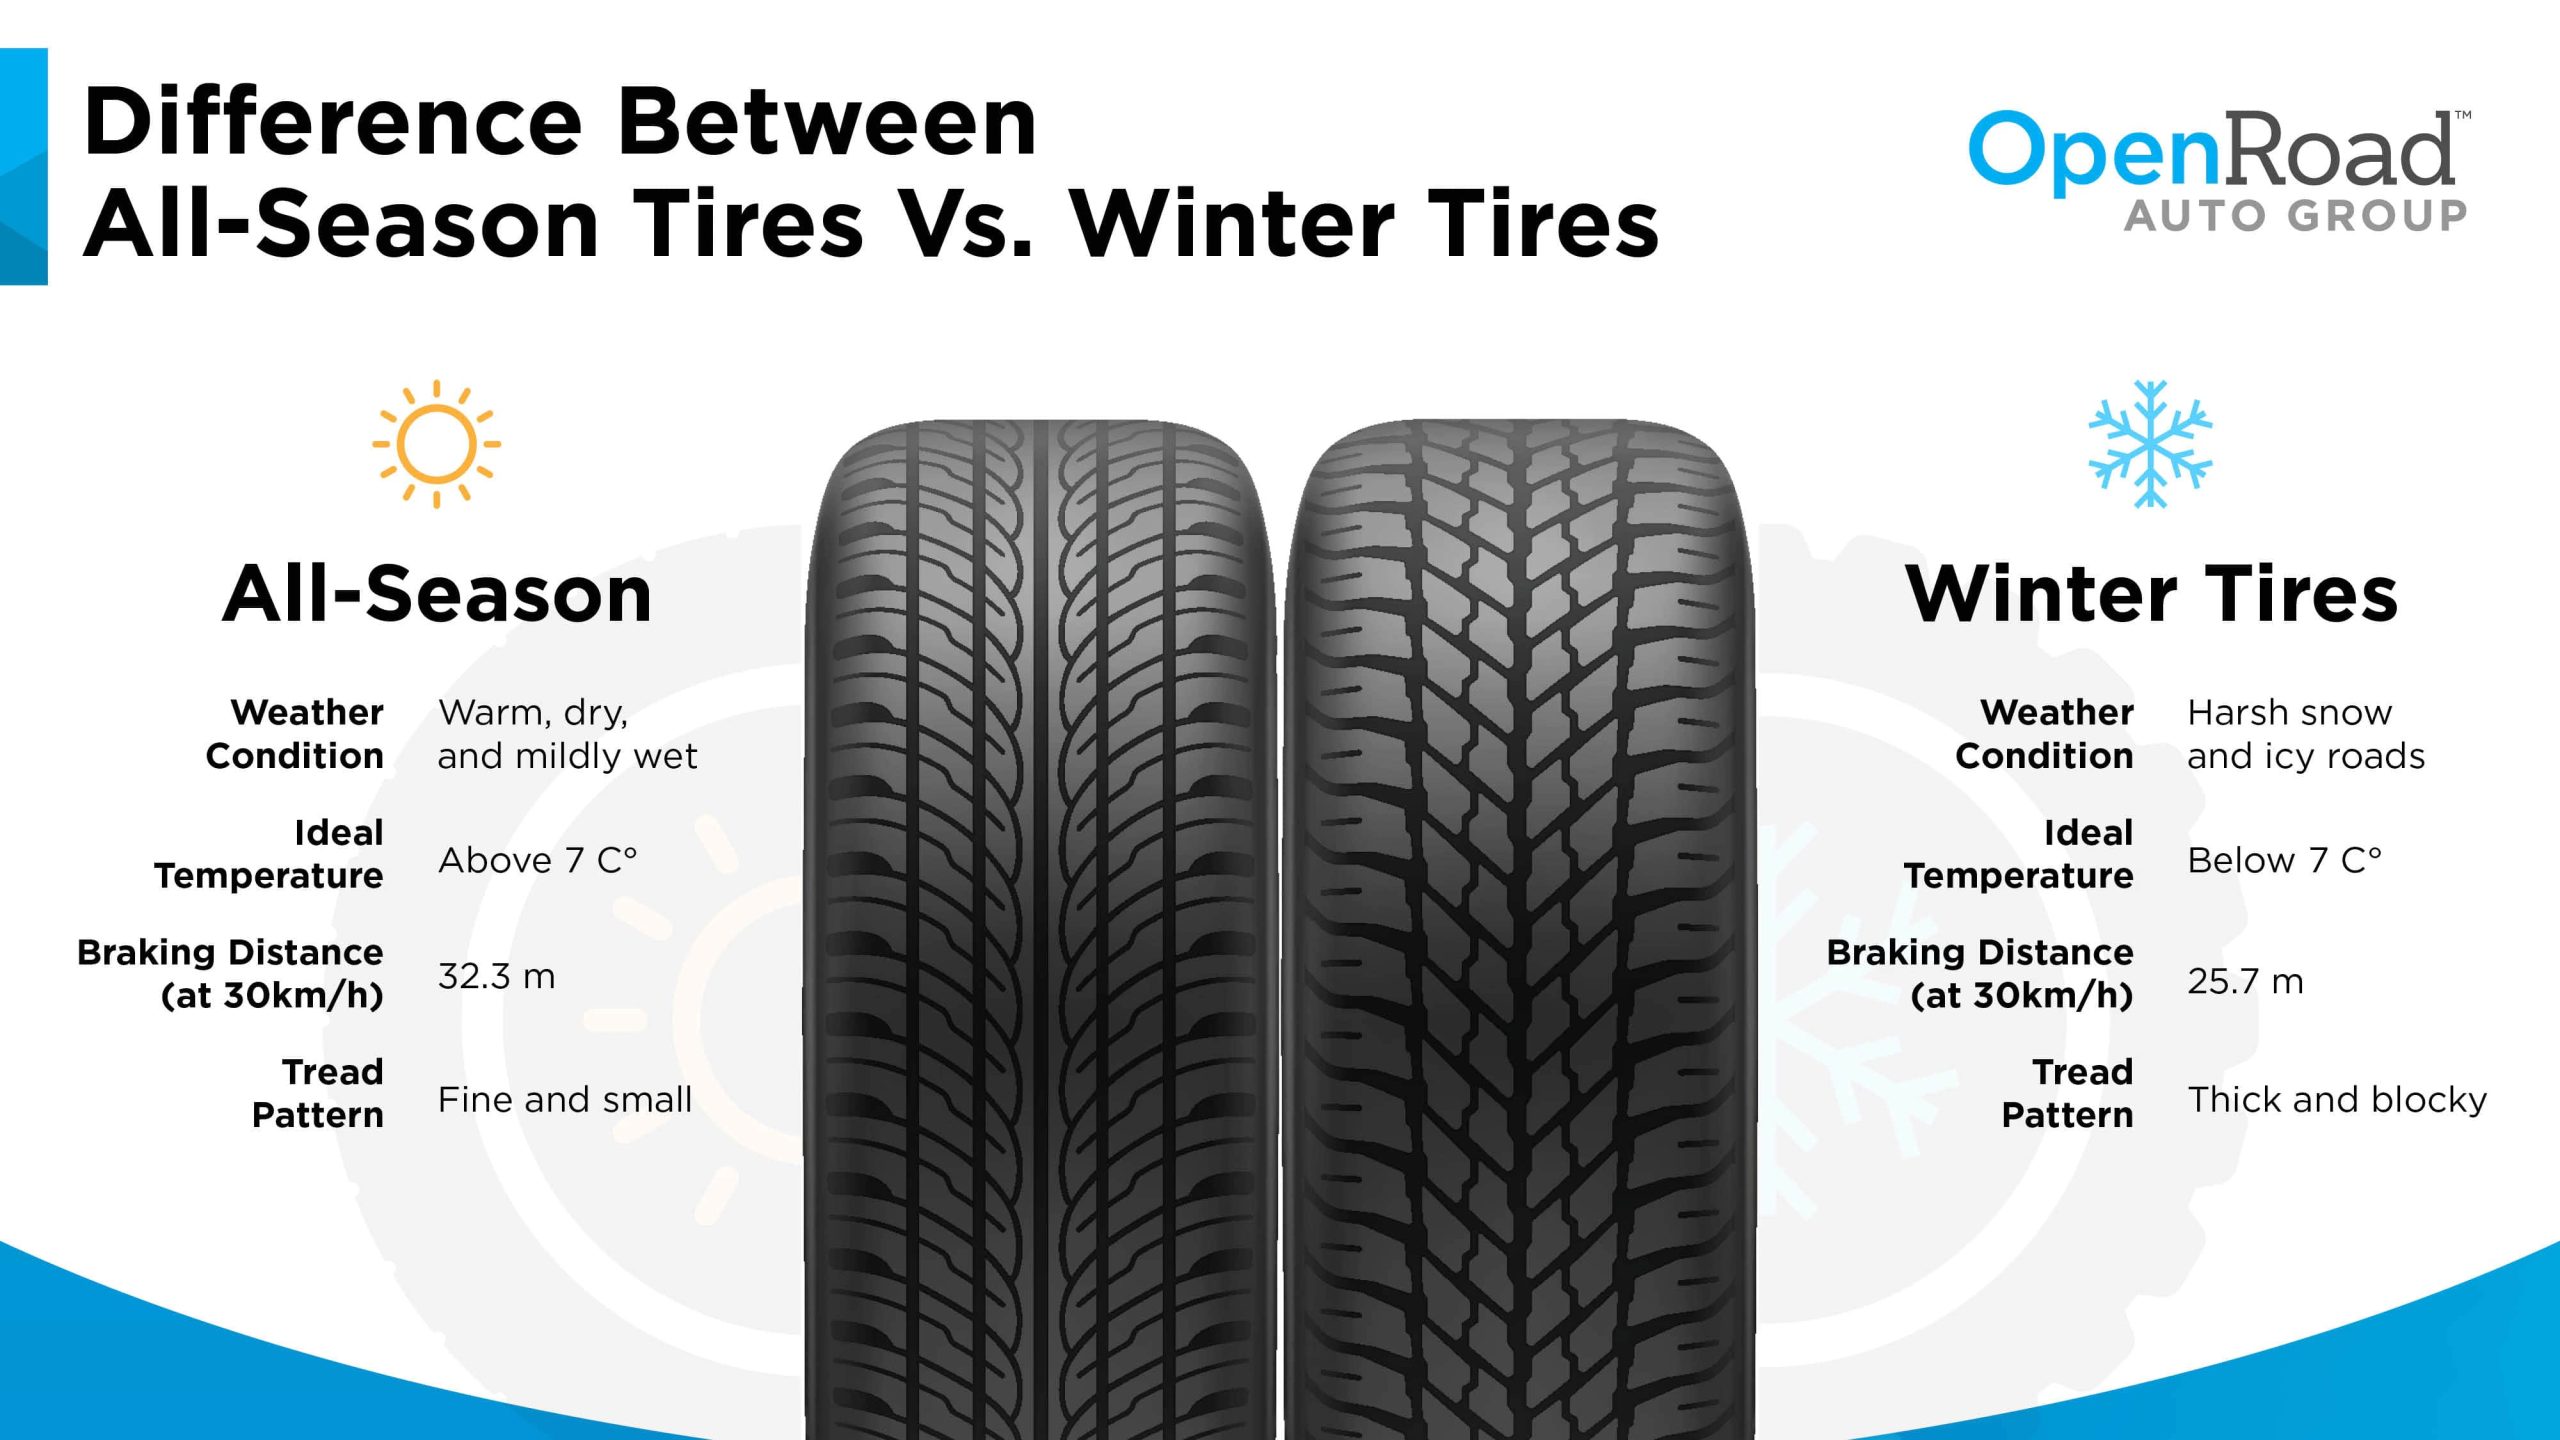 The importance of winter tires over all season tires